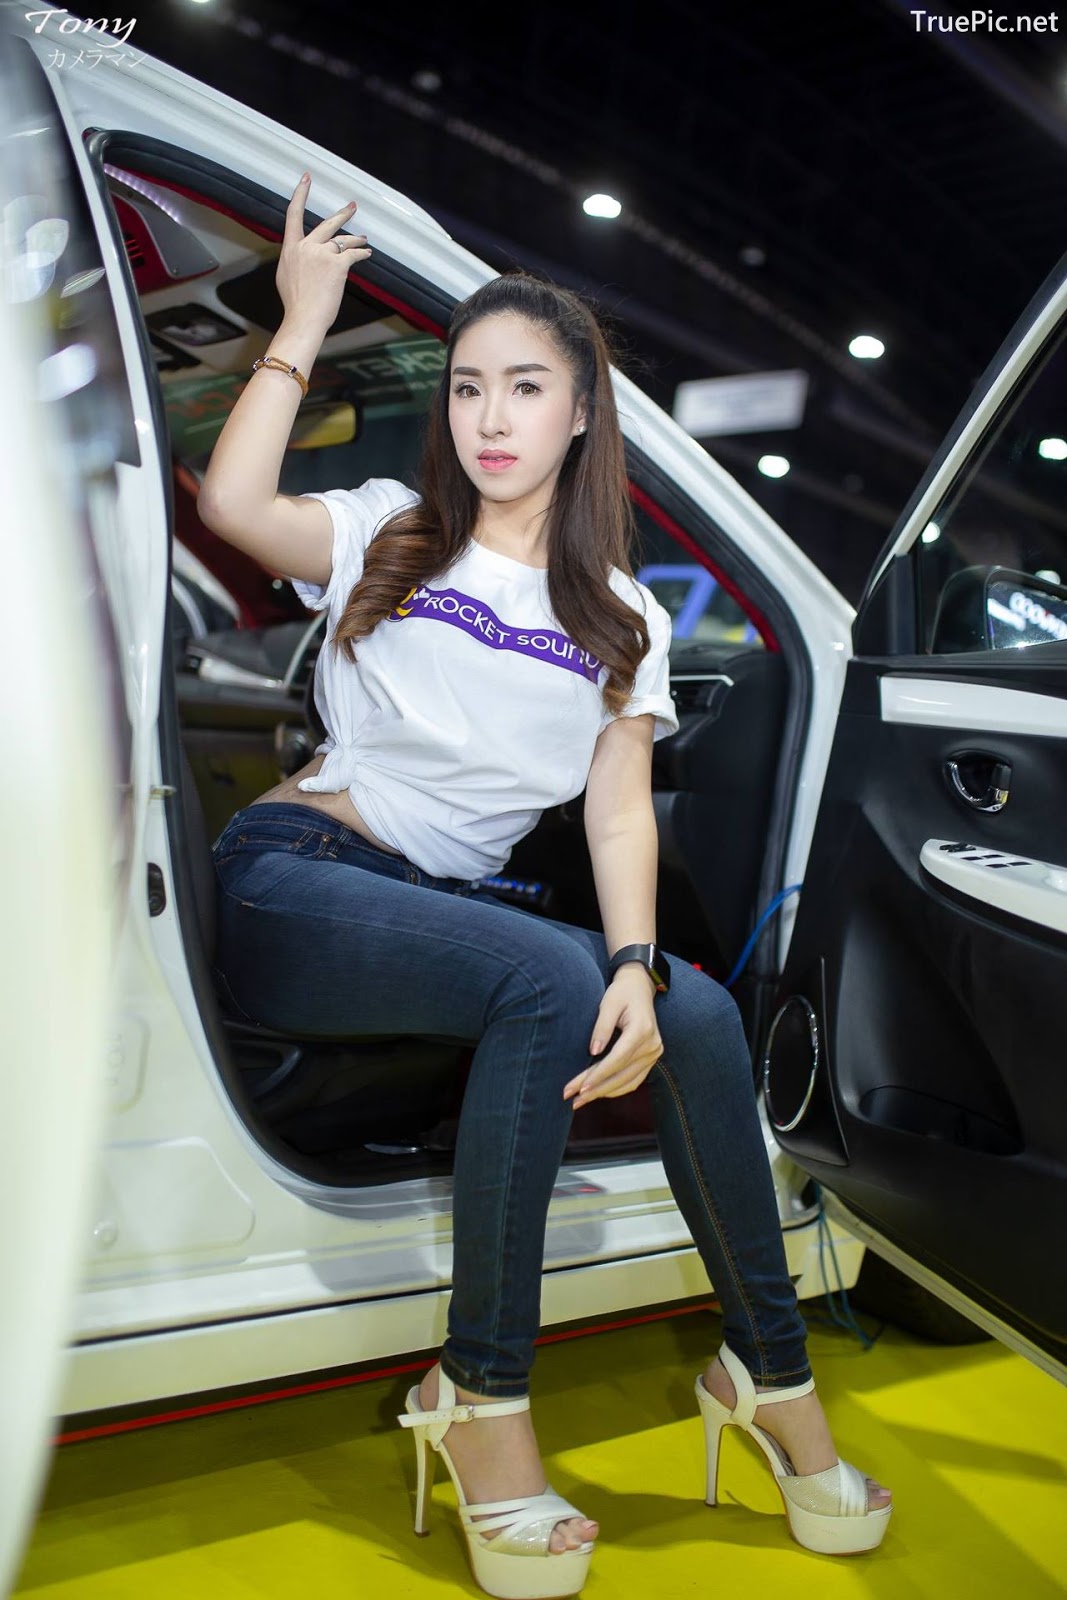 Image-Thailand-Hot-Model-Thai-Racing-Girl-At-Motor-Expo-2018-TruePic.net- Picture-115